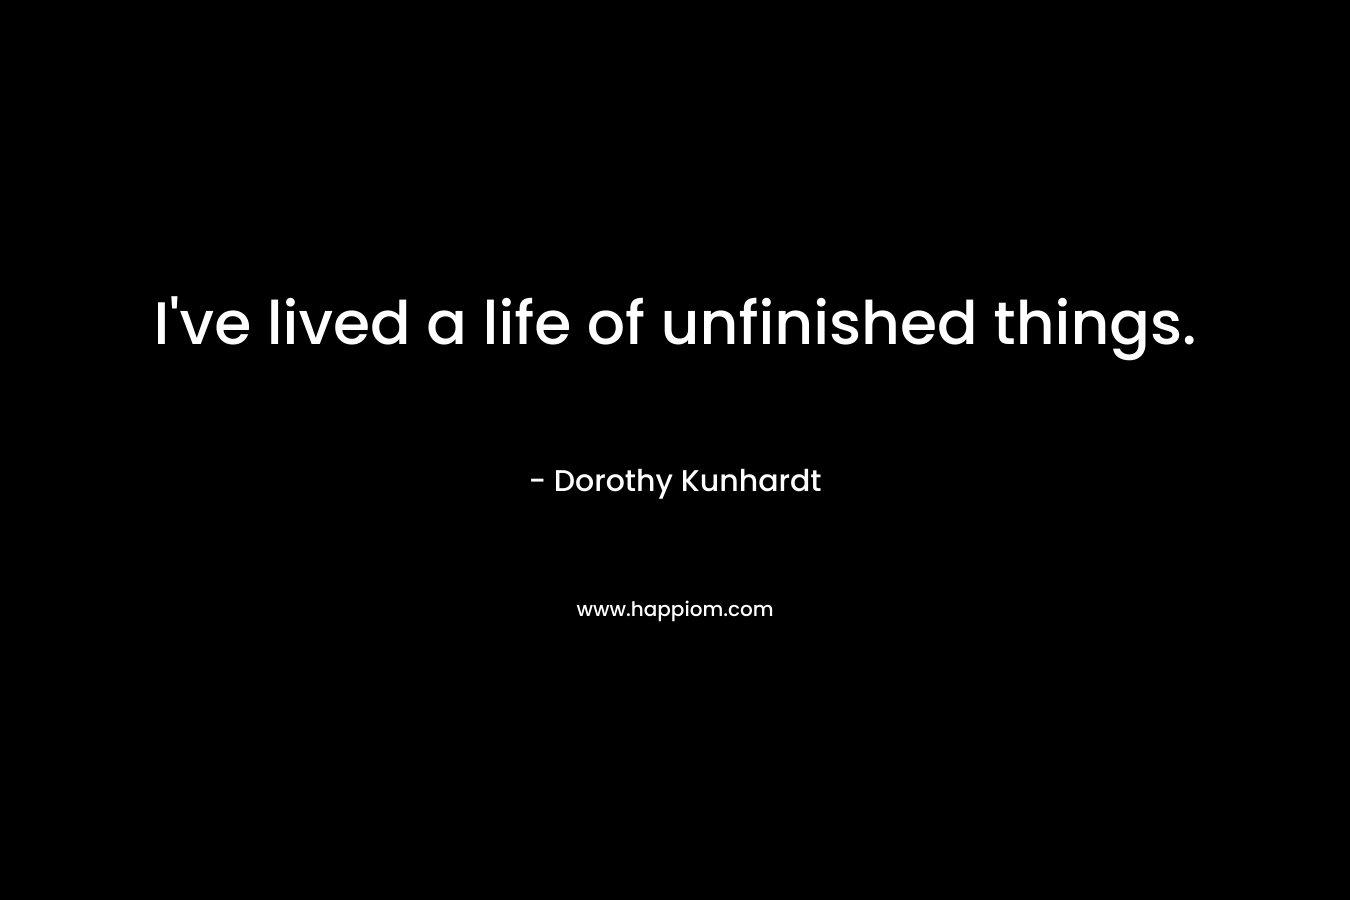 I've lived a life of unfinished things.